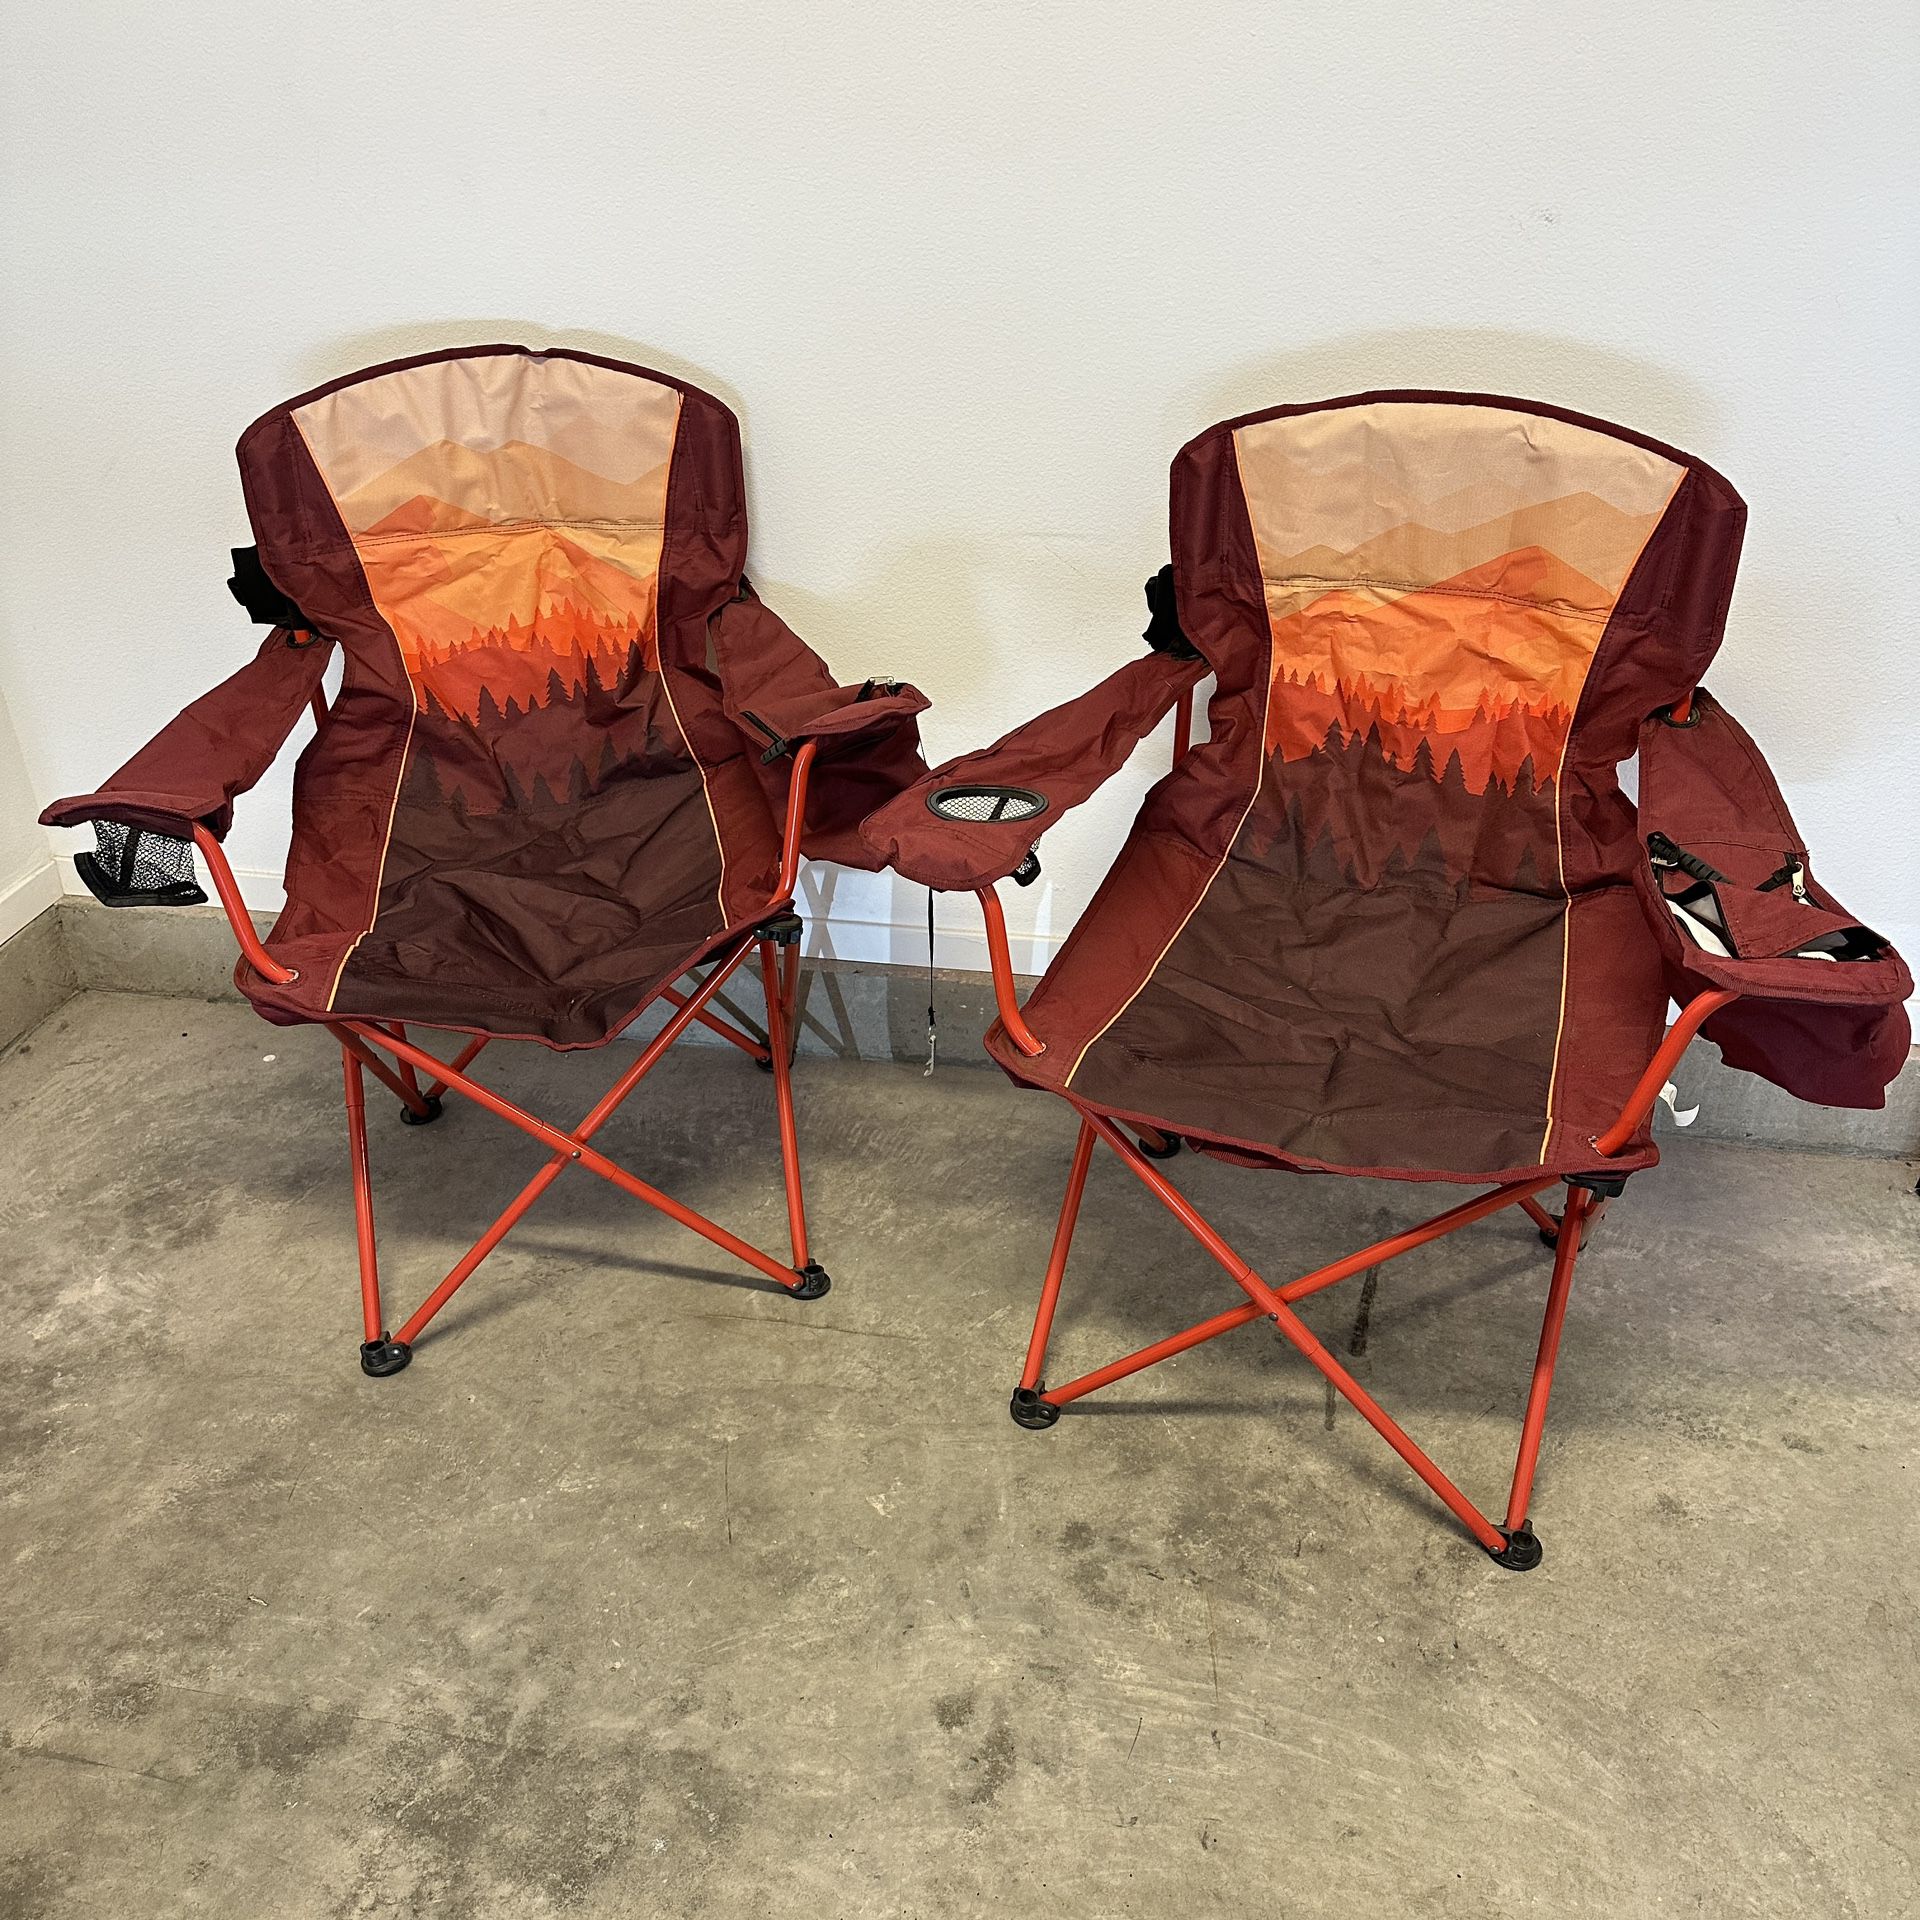 BURGUNDY RED COOL CAMPING CHAIR CHAIRS